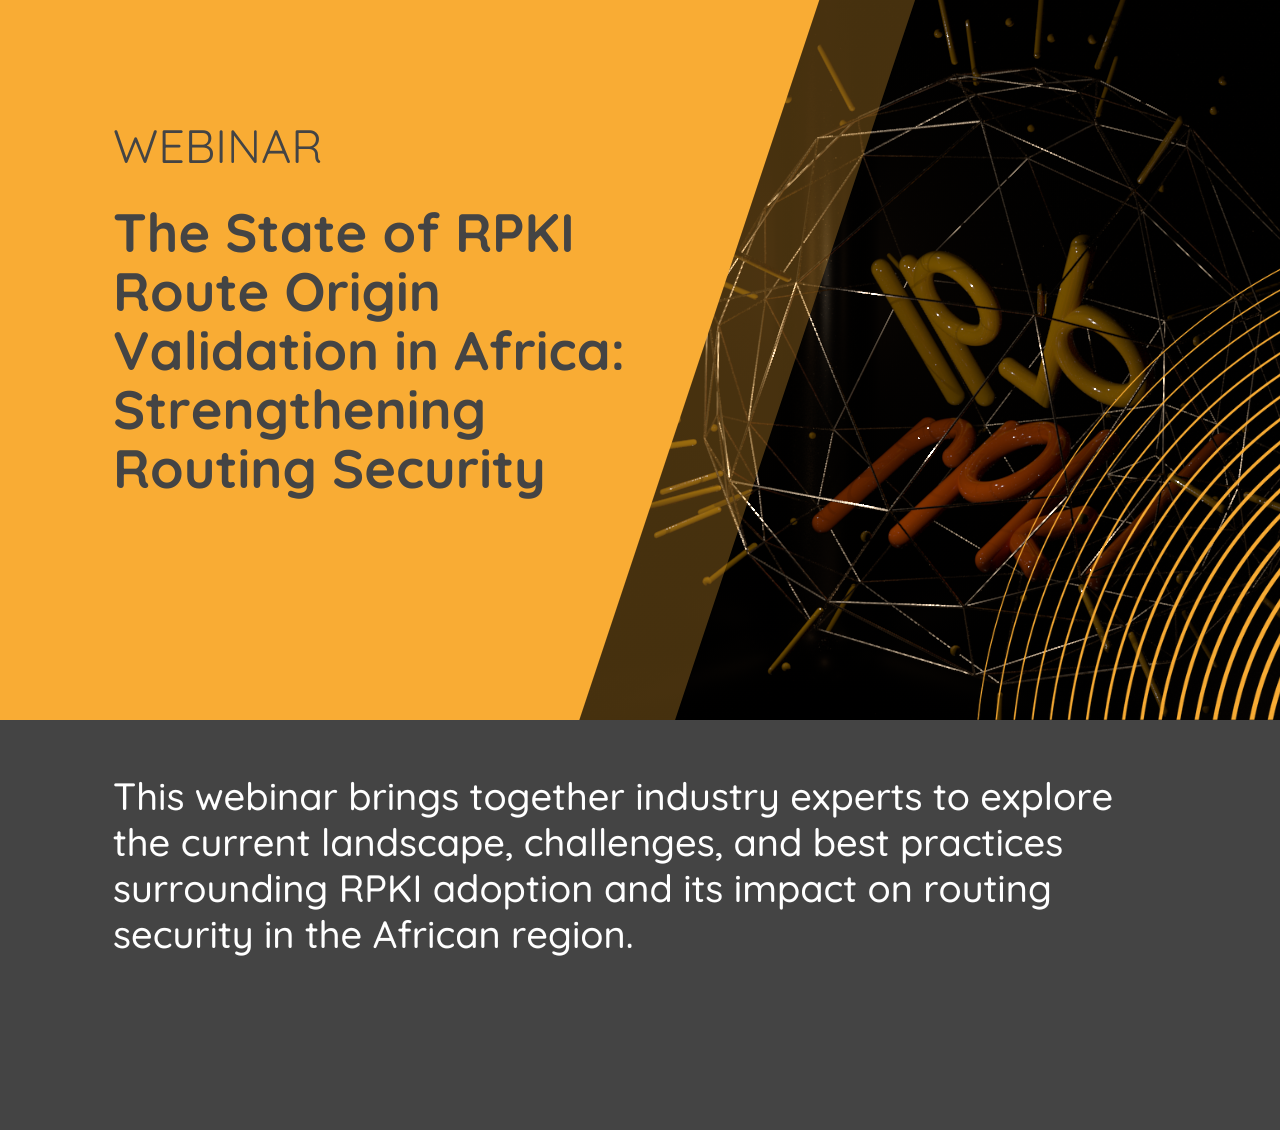 The State of RPKI Route Origin Validation in Africa: Strengthening Routing Security